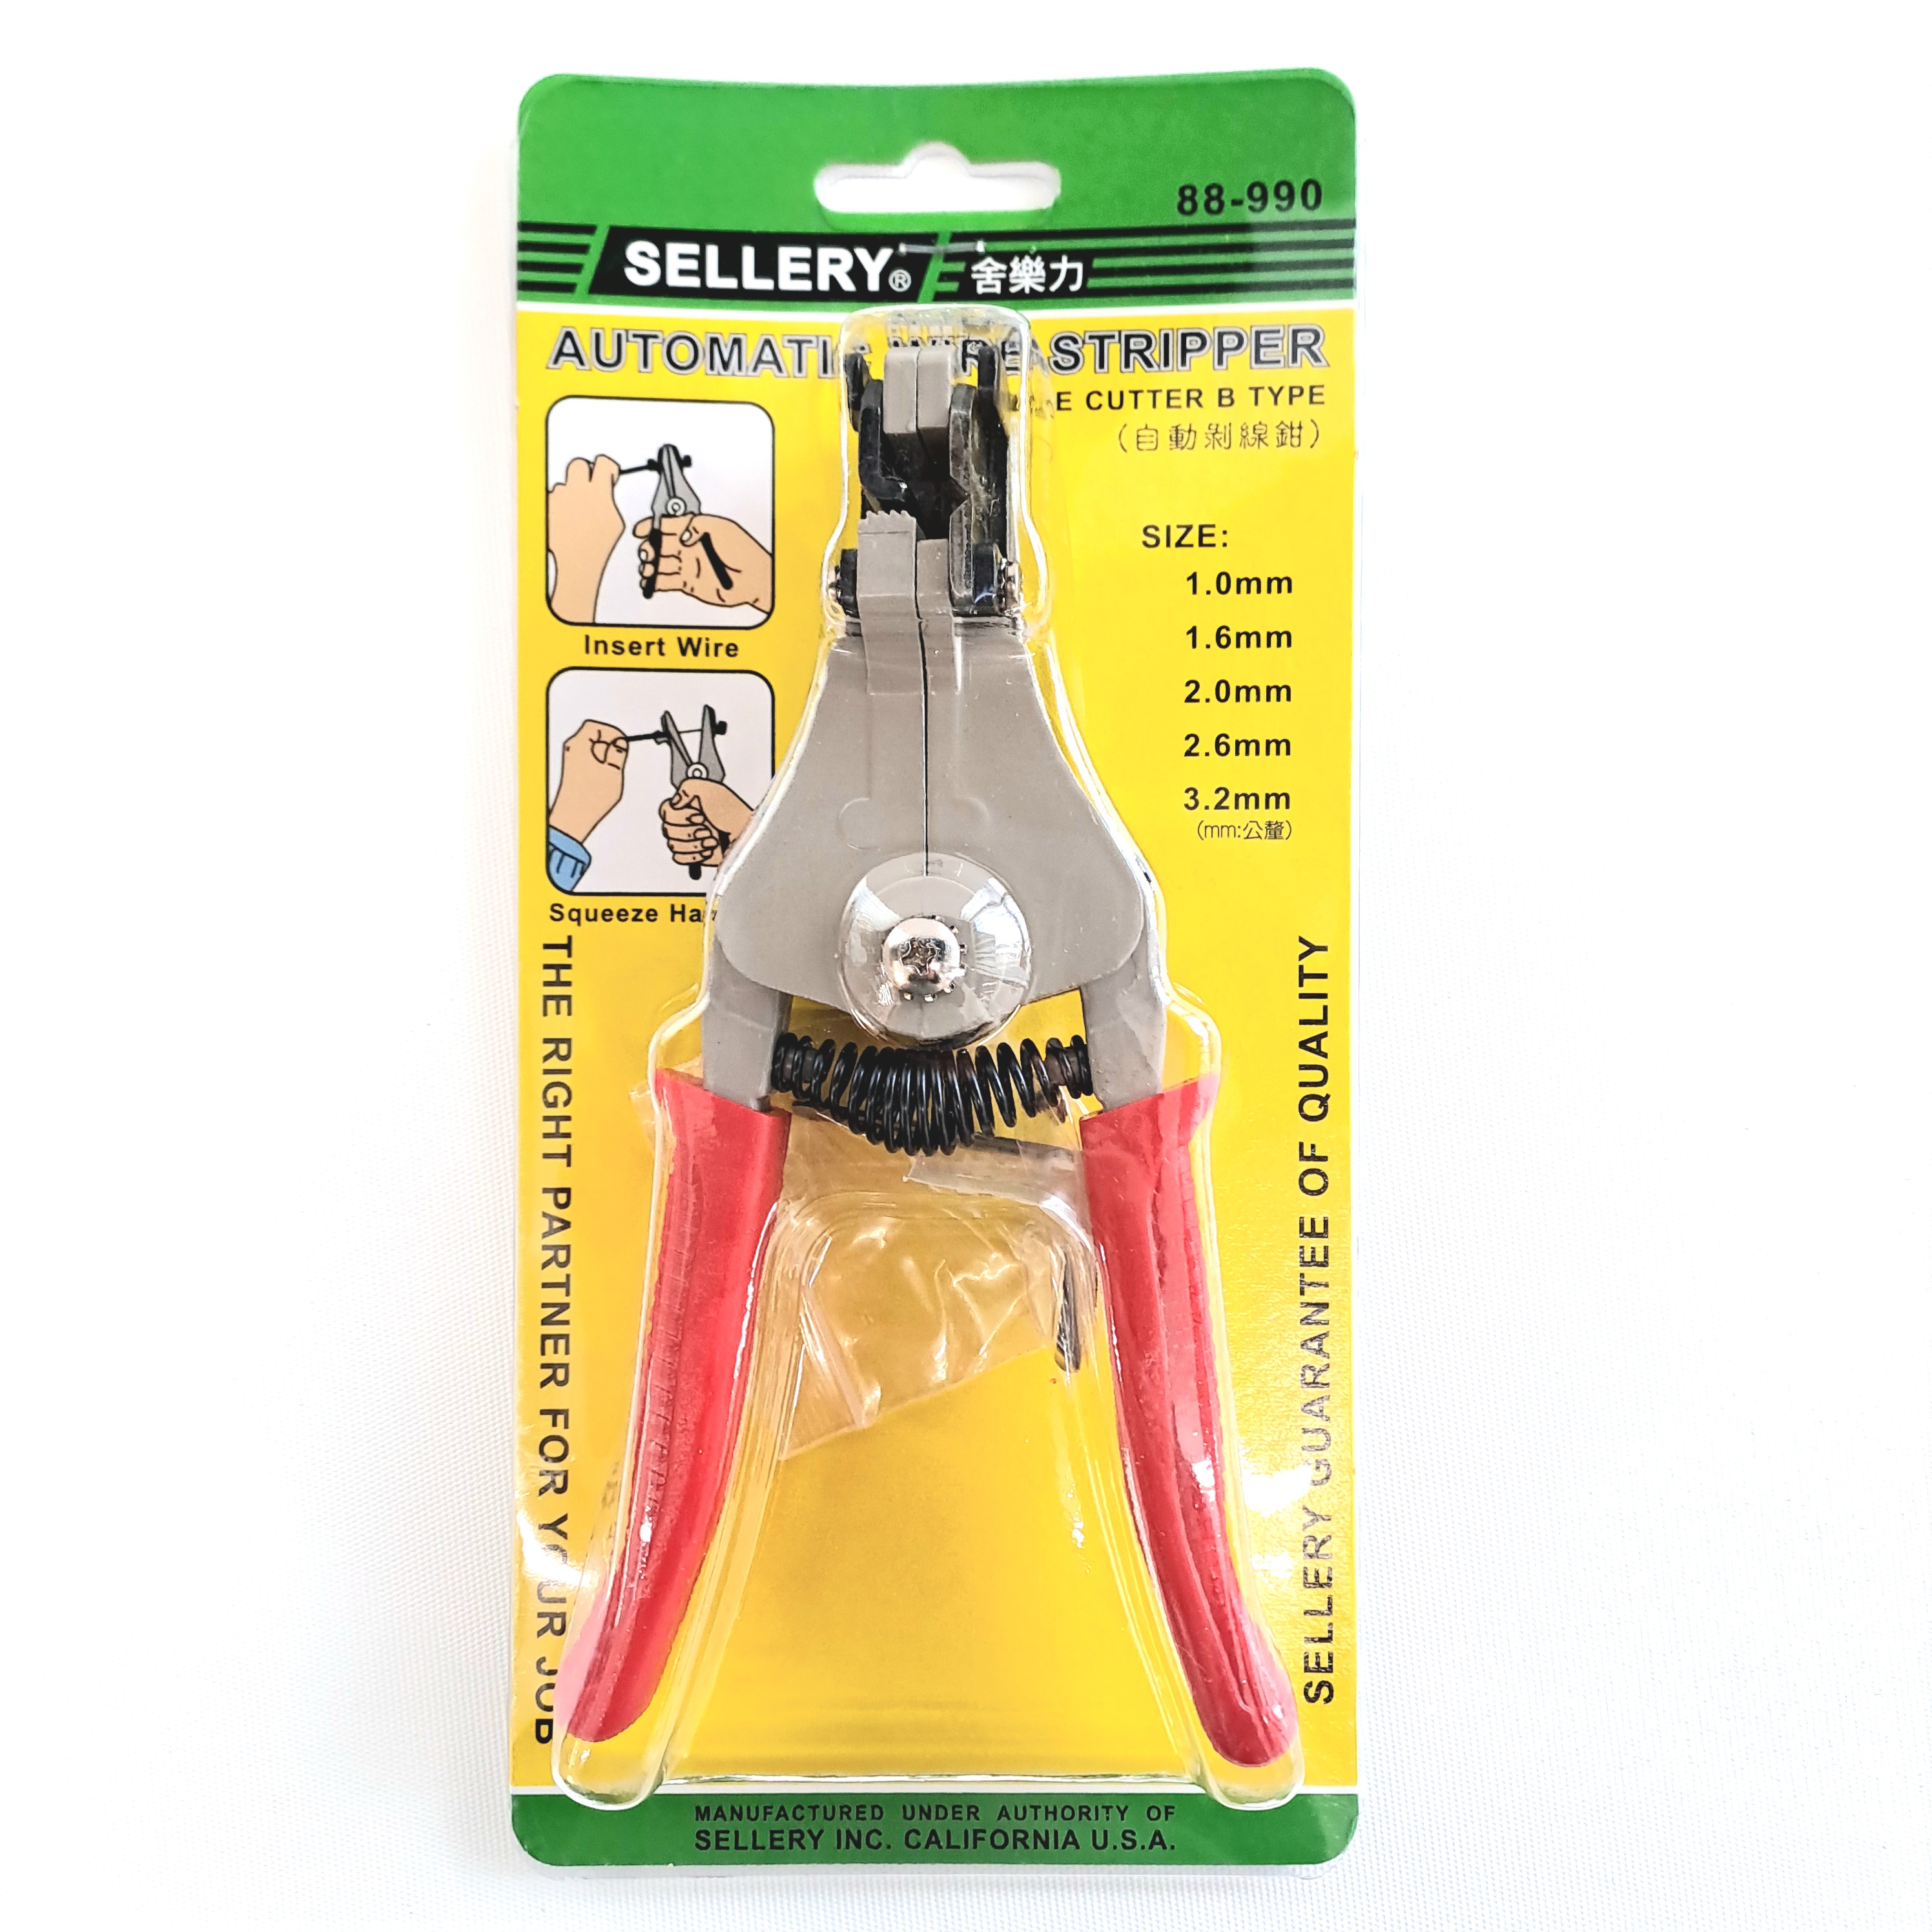 Sellery 88-990 Automatic Wire Stripper (1.0/1.6/2.0/ 2.6/3.2mm) B Type